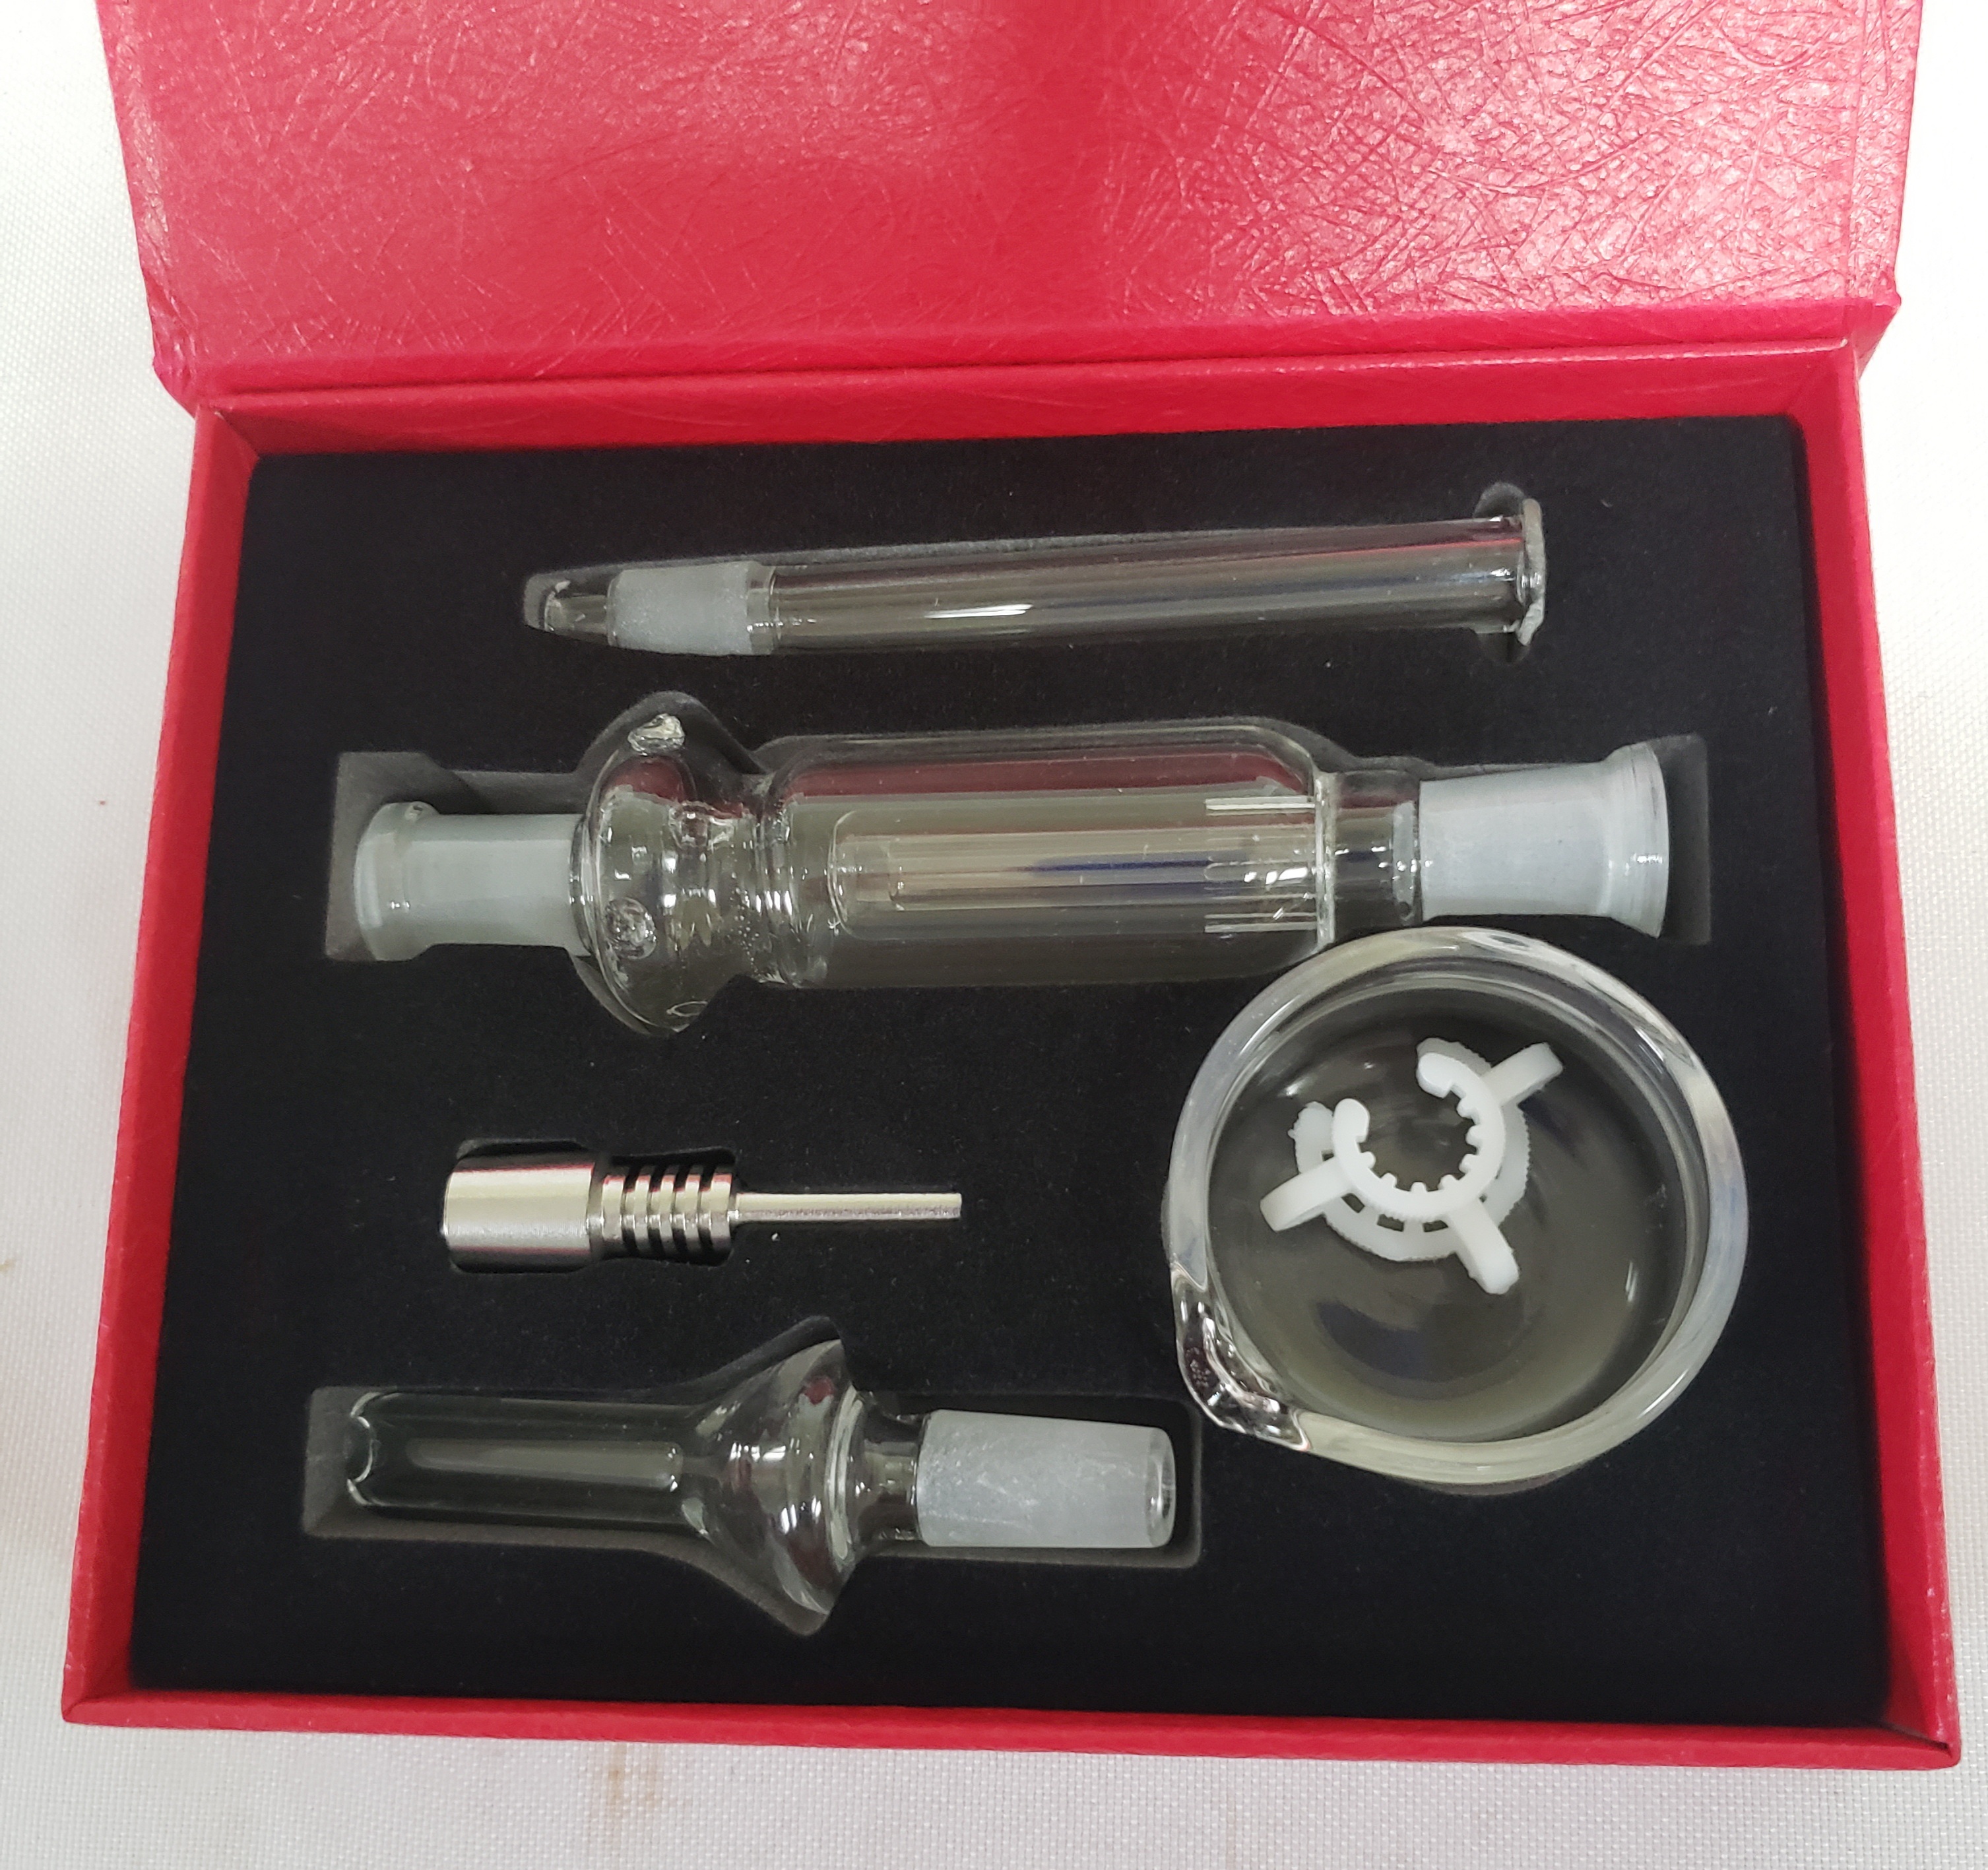 Nectar Collectors kit with 10mm titanium nail #MNC